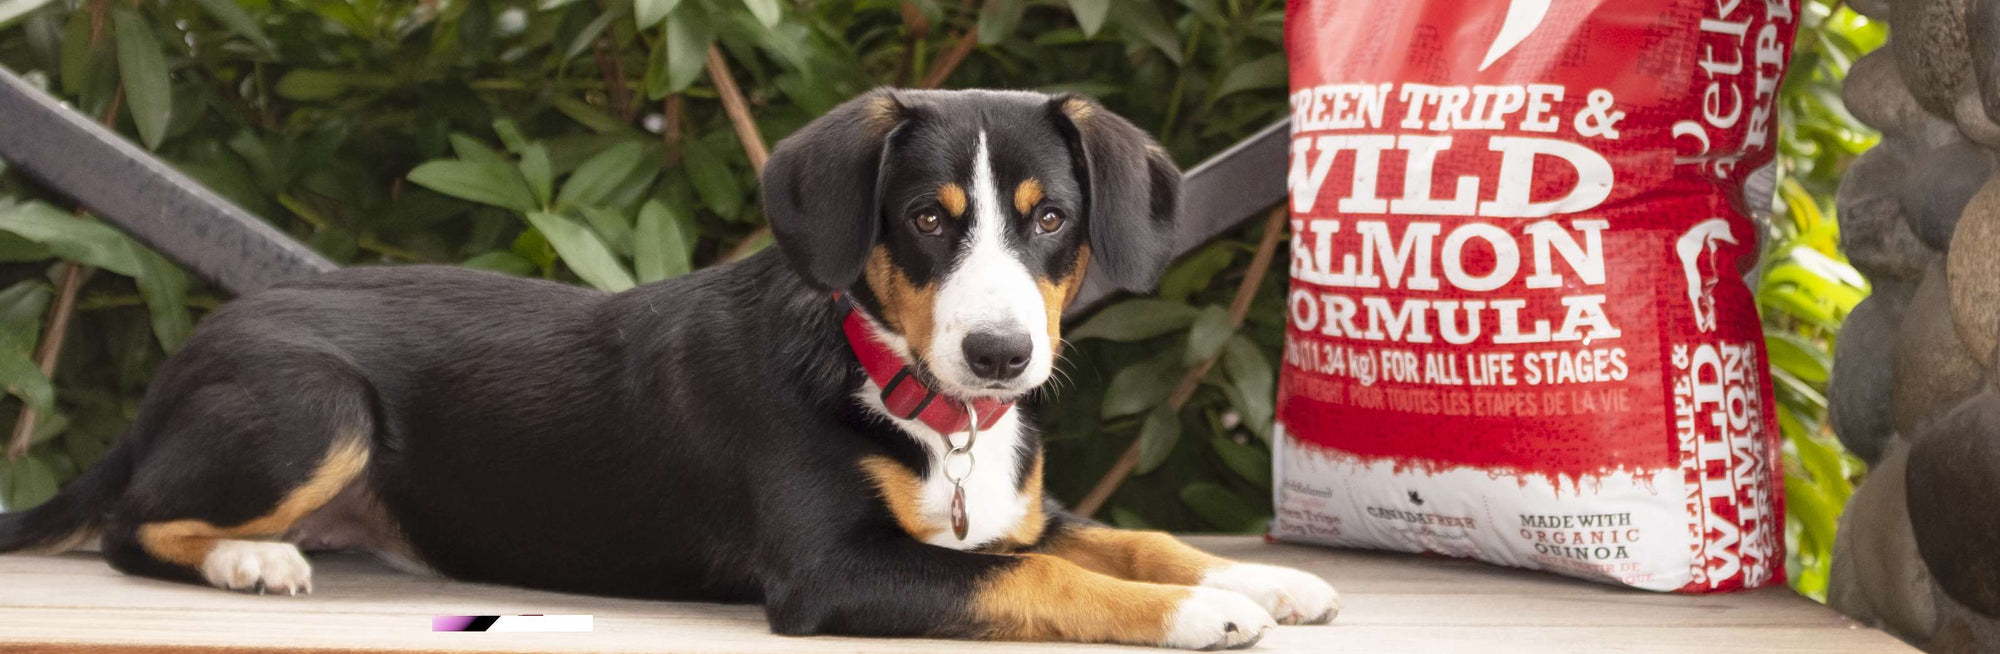 Young Entlebucher Mountain Dog sitting on a bench with a 25lb bag of Tripe Dry Wild Salmon Formula.